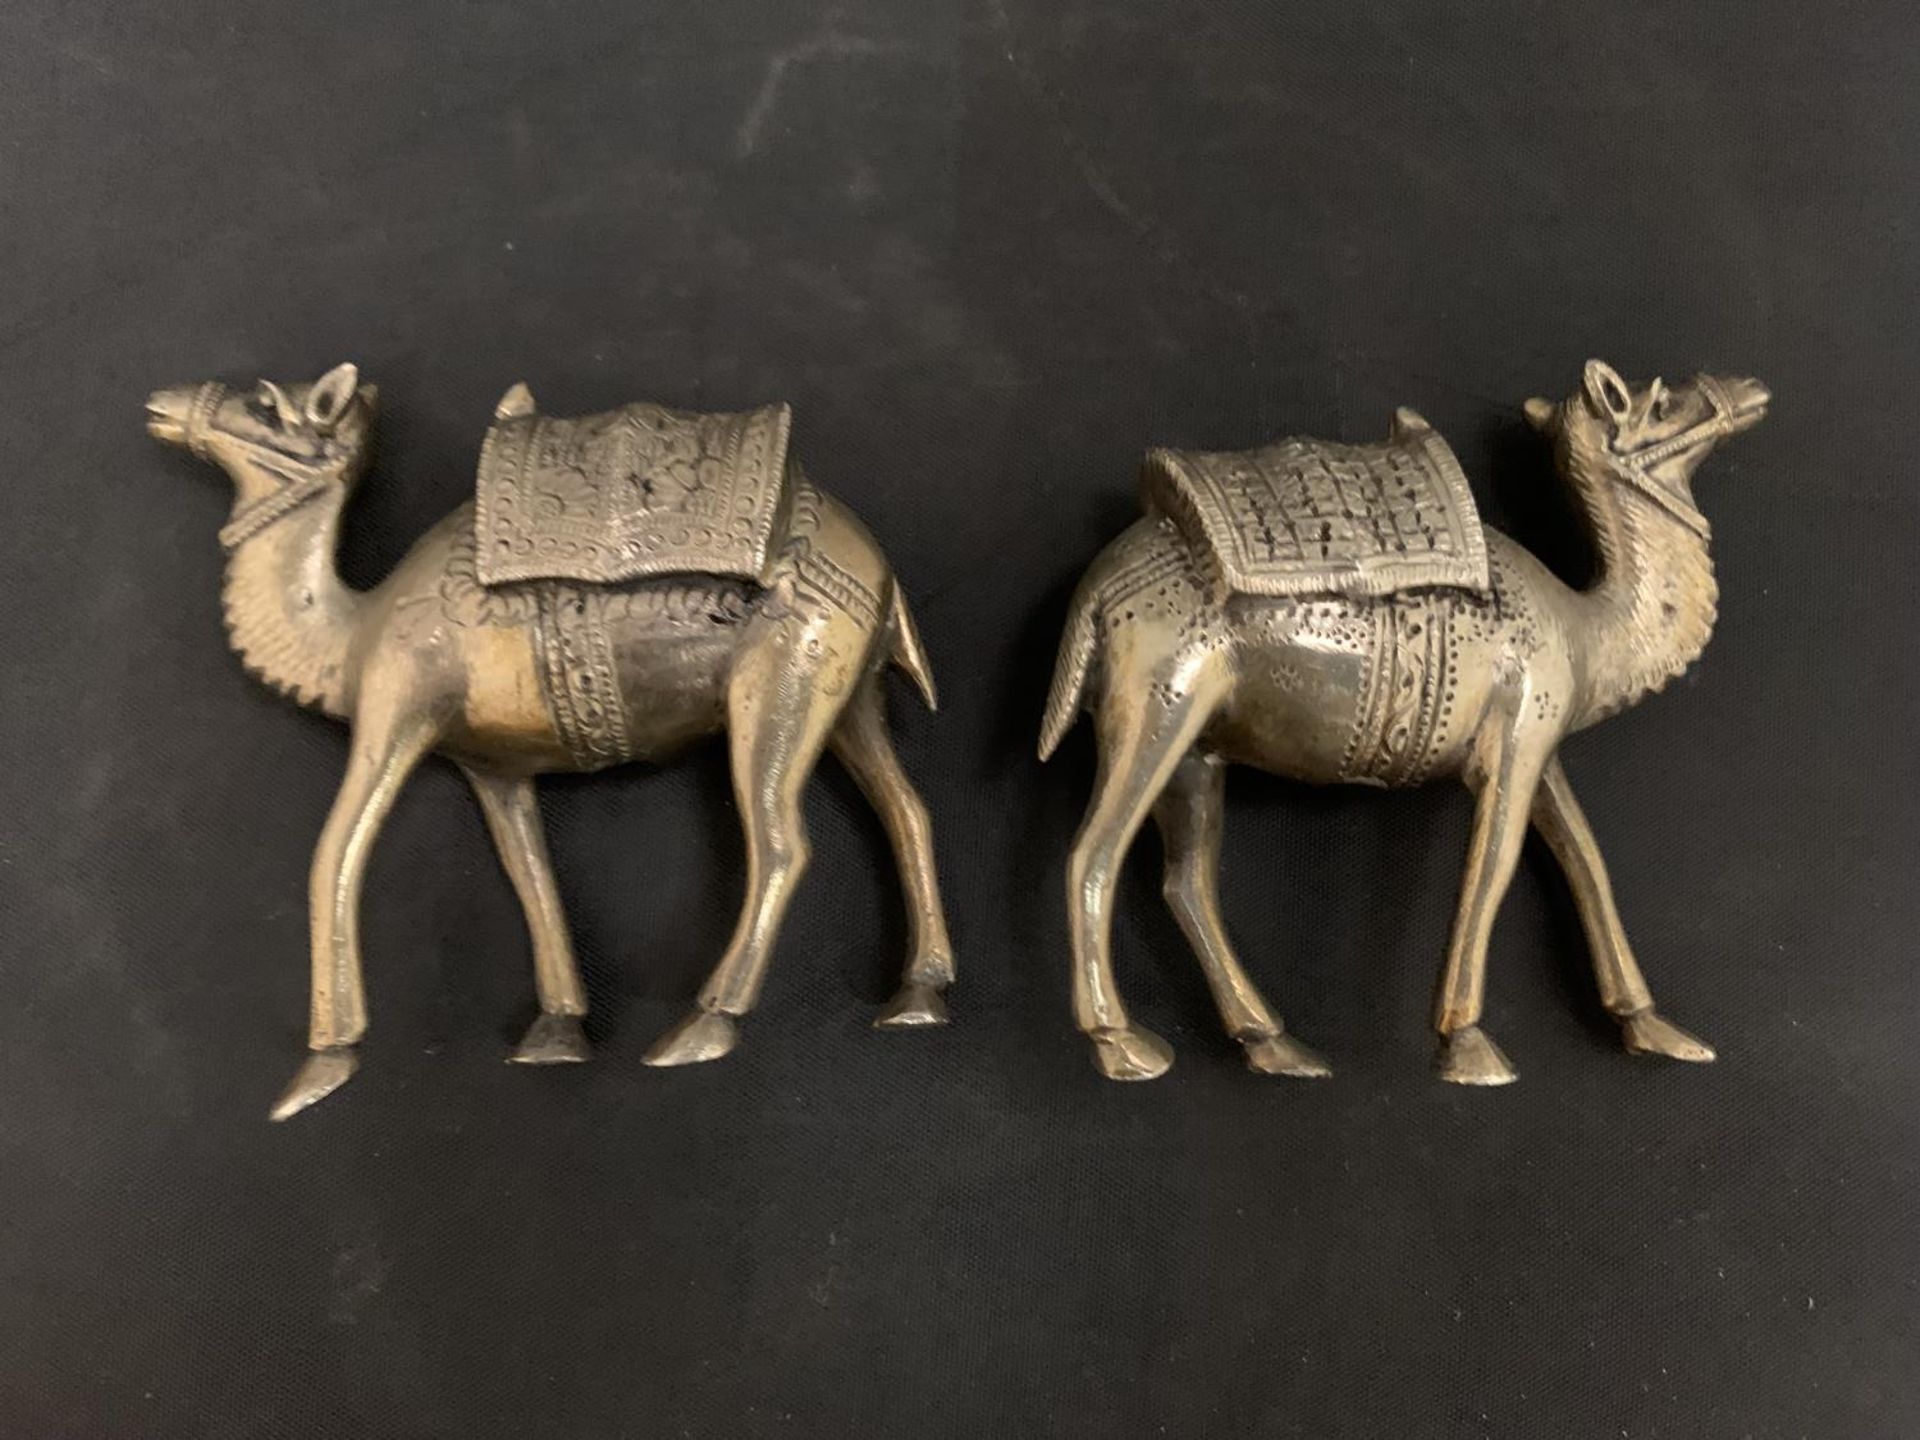 A PAIR OF METAL CAMEL ORNAMENTS, HEIGHT 7.5CM - Image 2 of 2